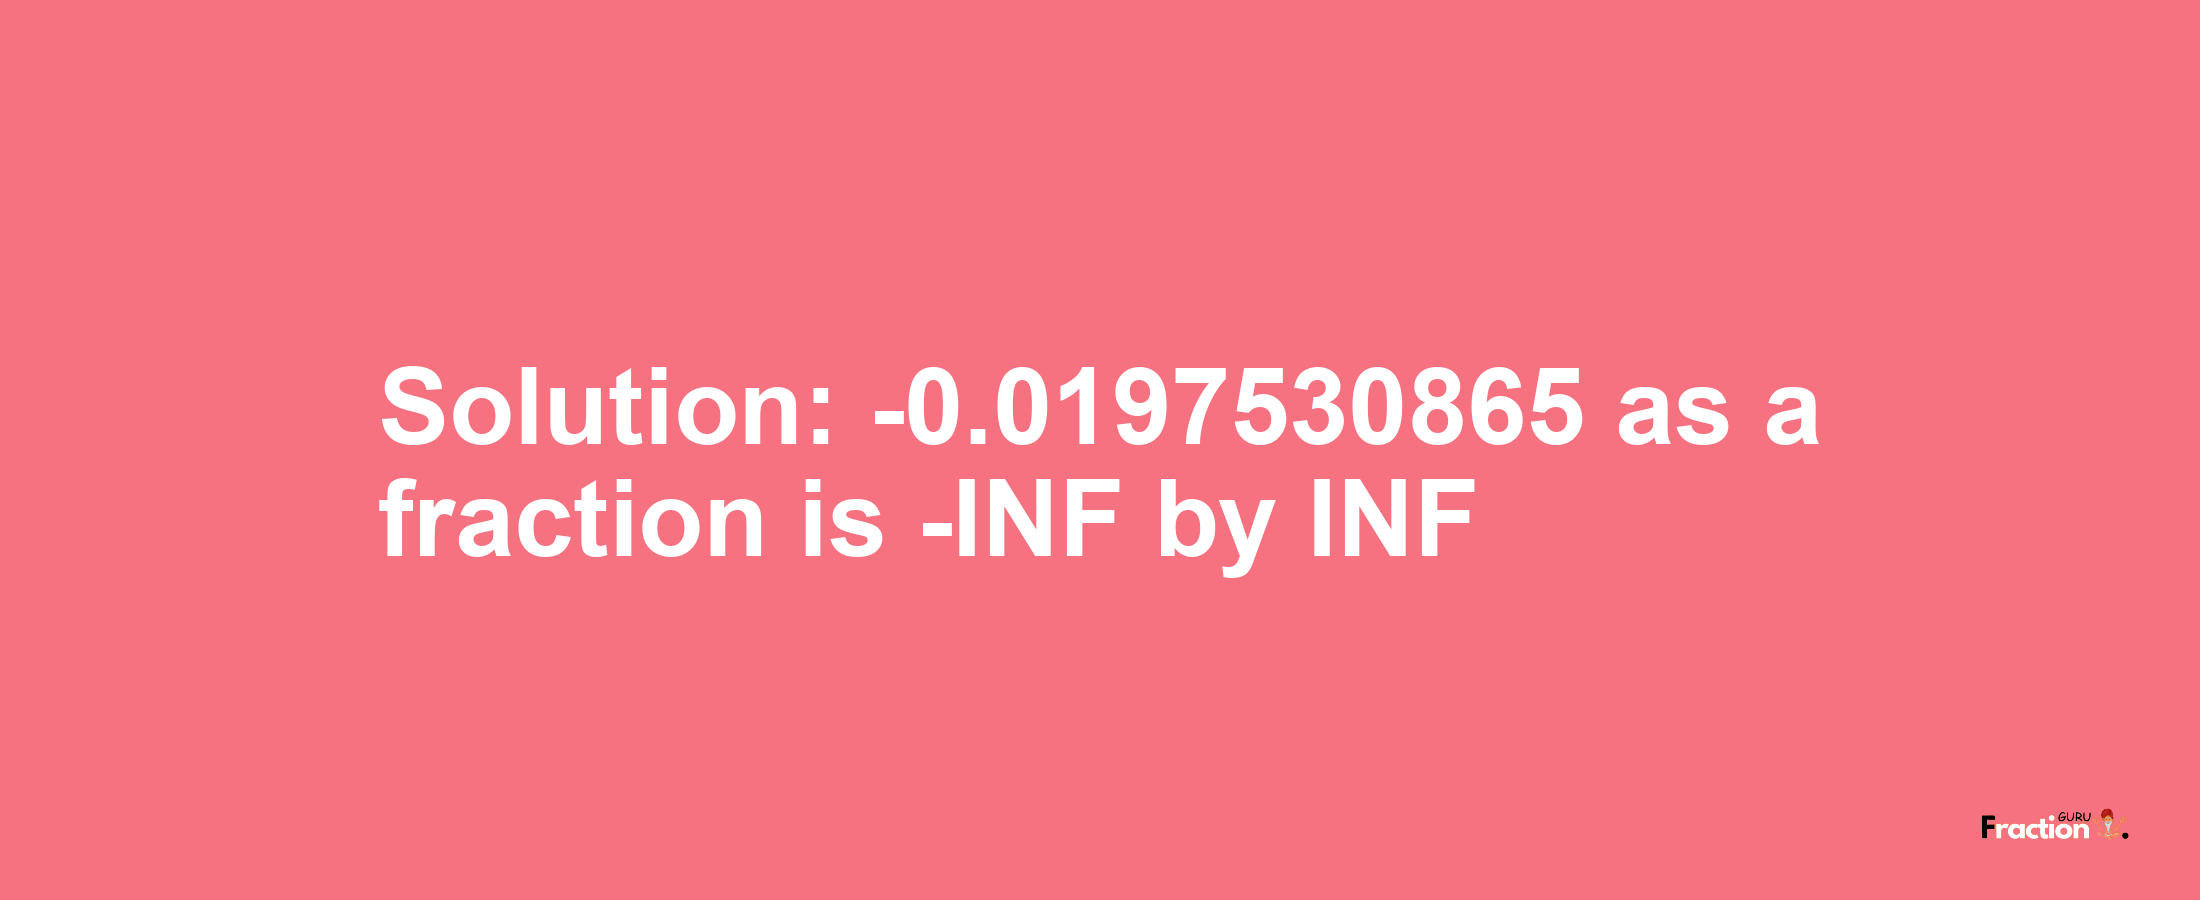 Solution:-0.0197530865 as a fraction is -INF/INF